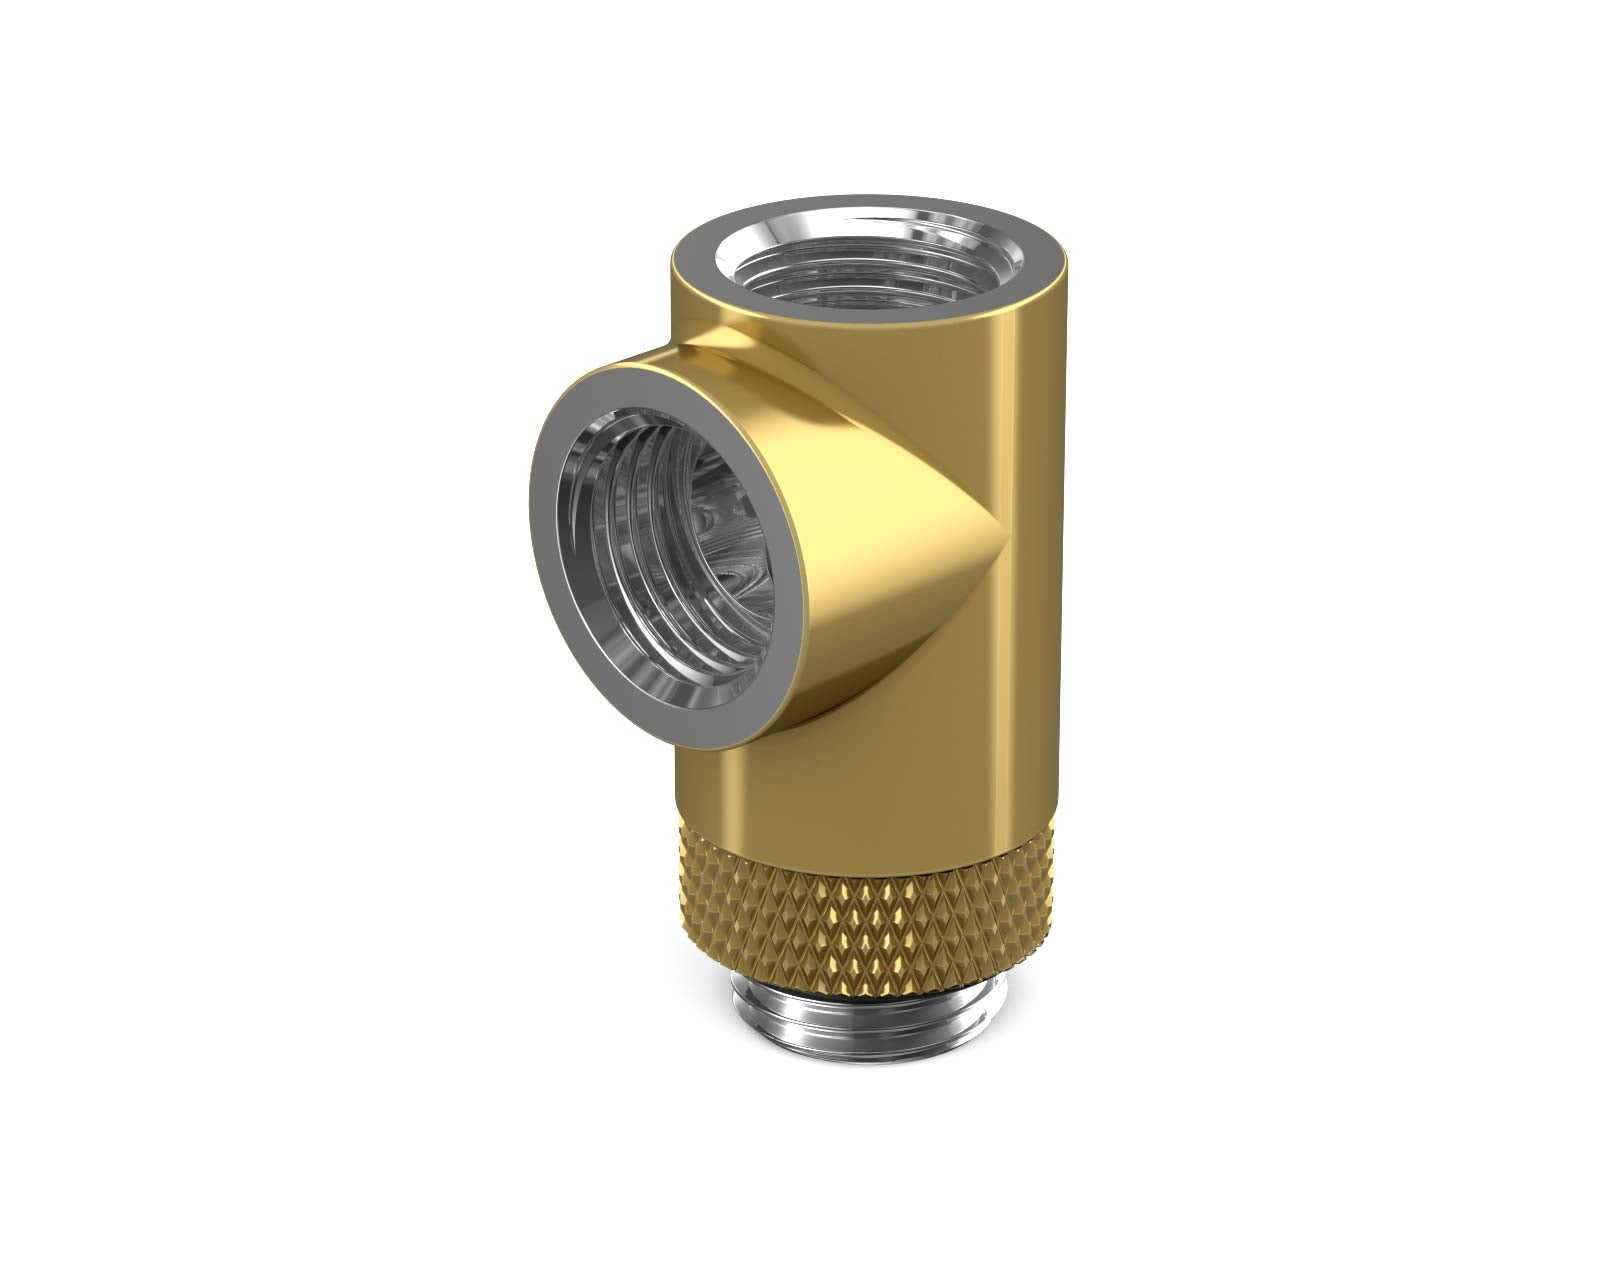 PrimoChill G 1/4in. Inline Rotary 3-Way SX Female T Adapter - PrimoChill - KEEPING IT COOL Gold